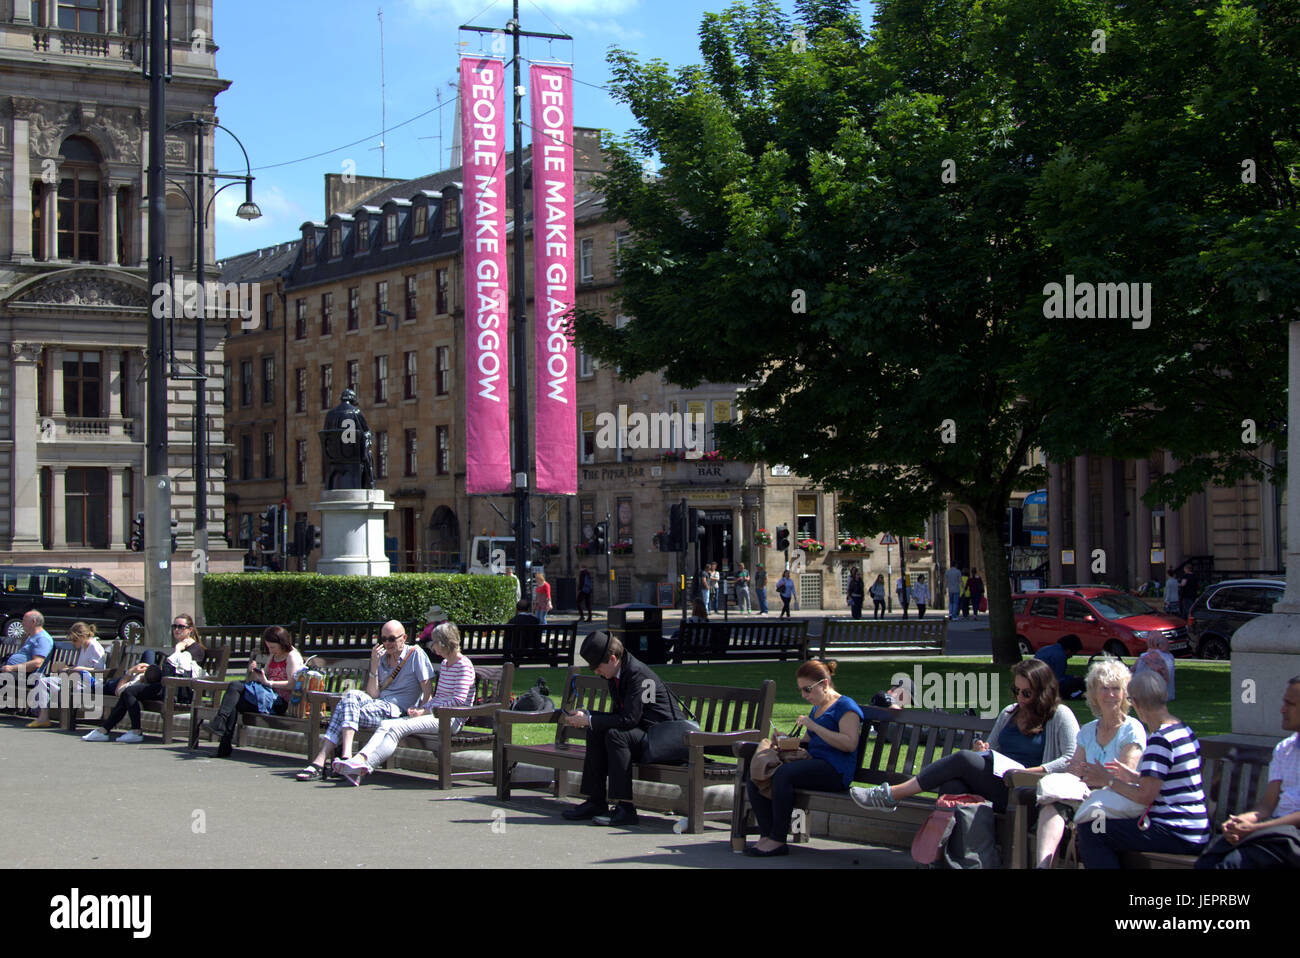 Summer weather returns and people enjoy the summer on the streets , George Square , Scotland   tourists catches some of the sunny weather Stock Photo